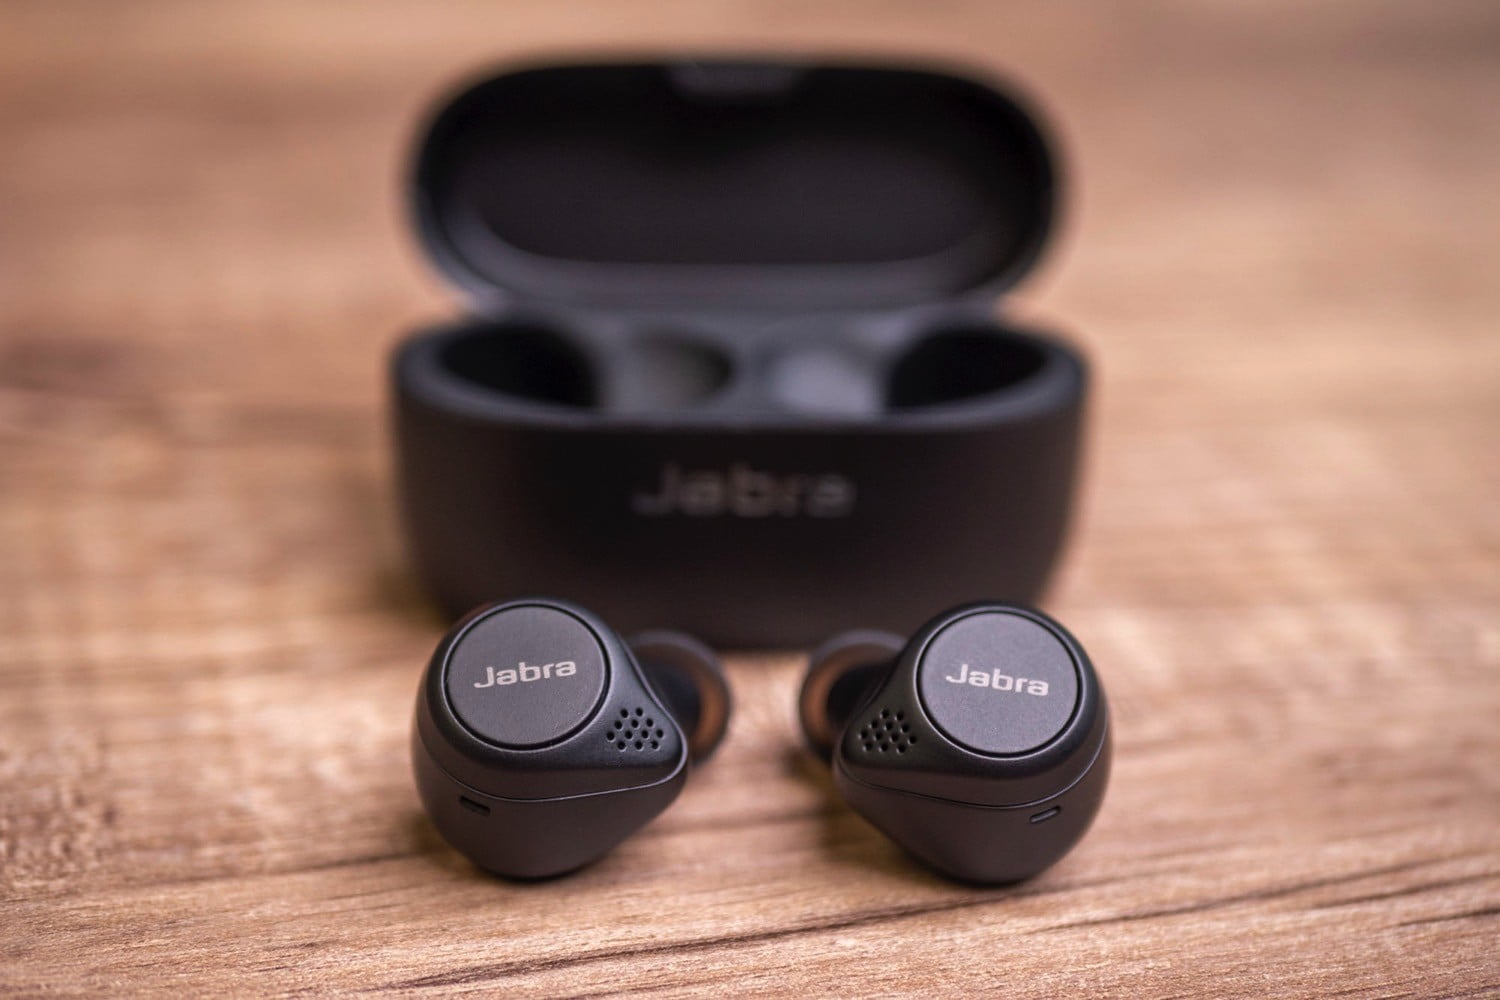 In this article, We will also get to see the performance of Jabra Elite 75T and compare it with the Sennheiser Momentum True Wireless 2.